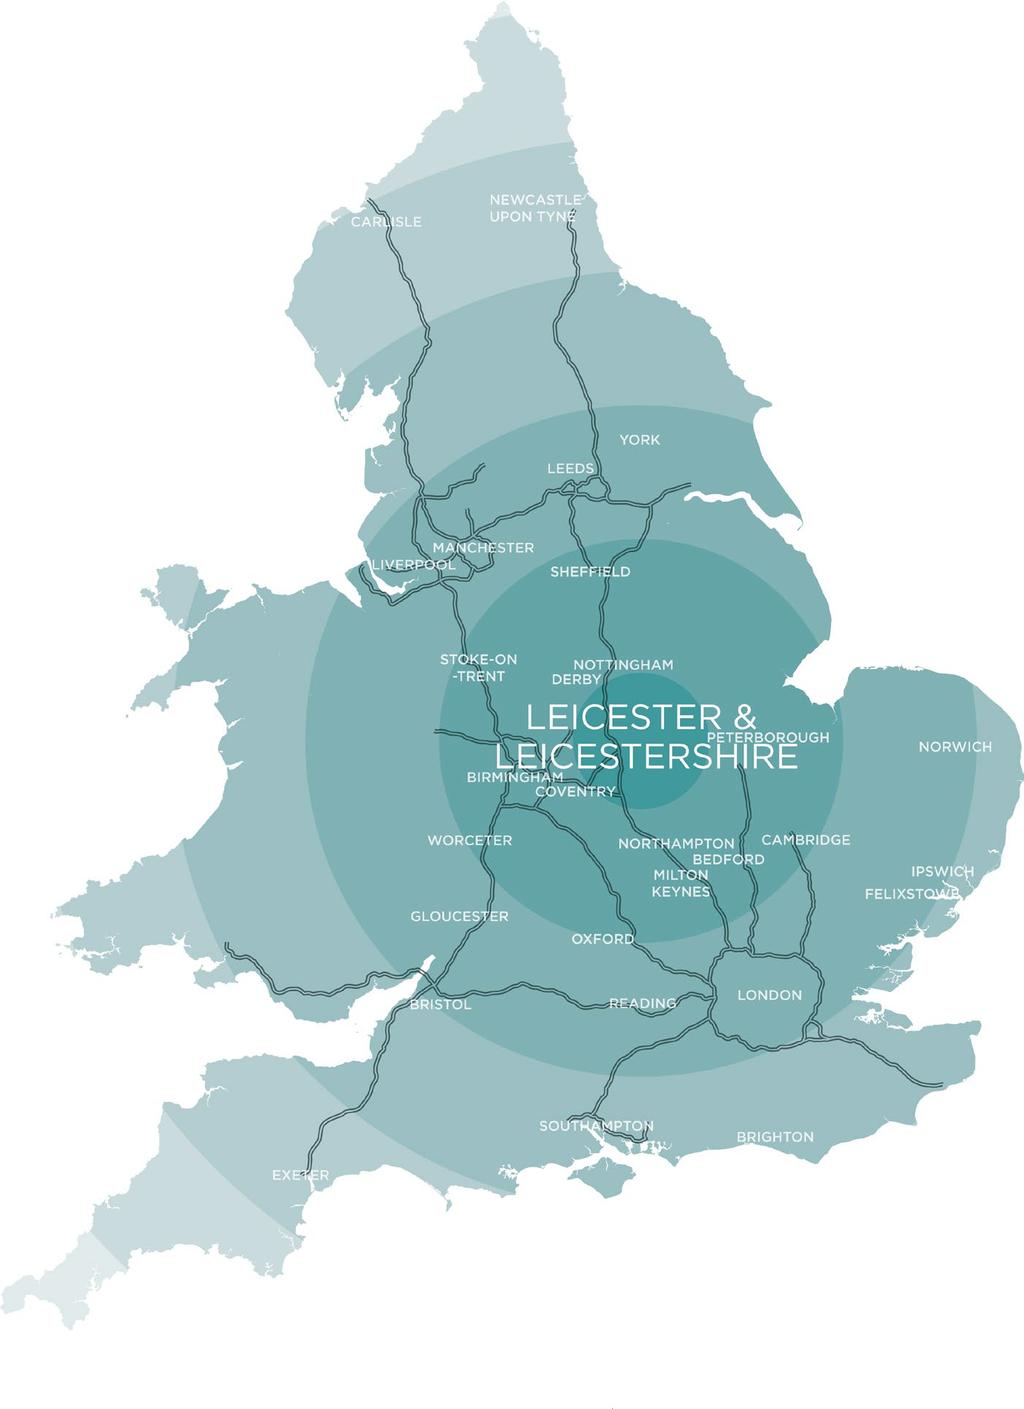 PLANNING FOR OUR FUTURE Leicester & Leicestershire has huge potential for growth.